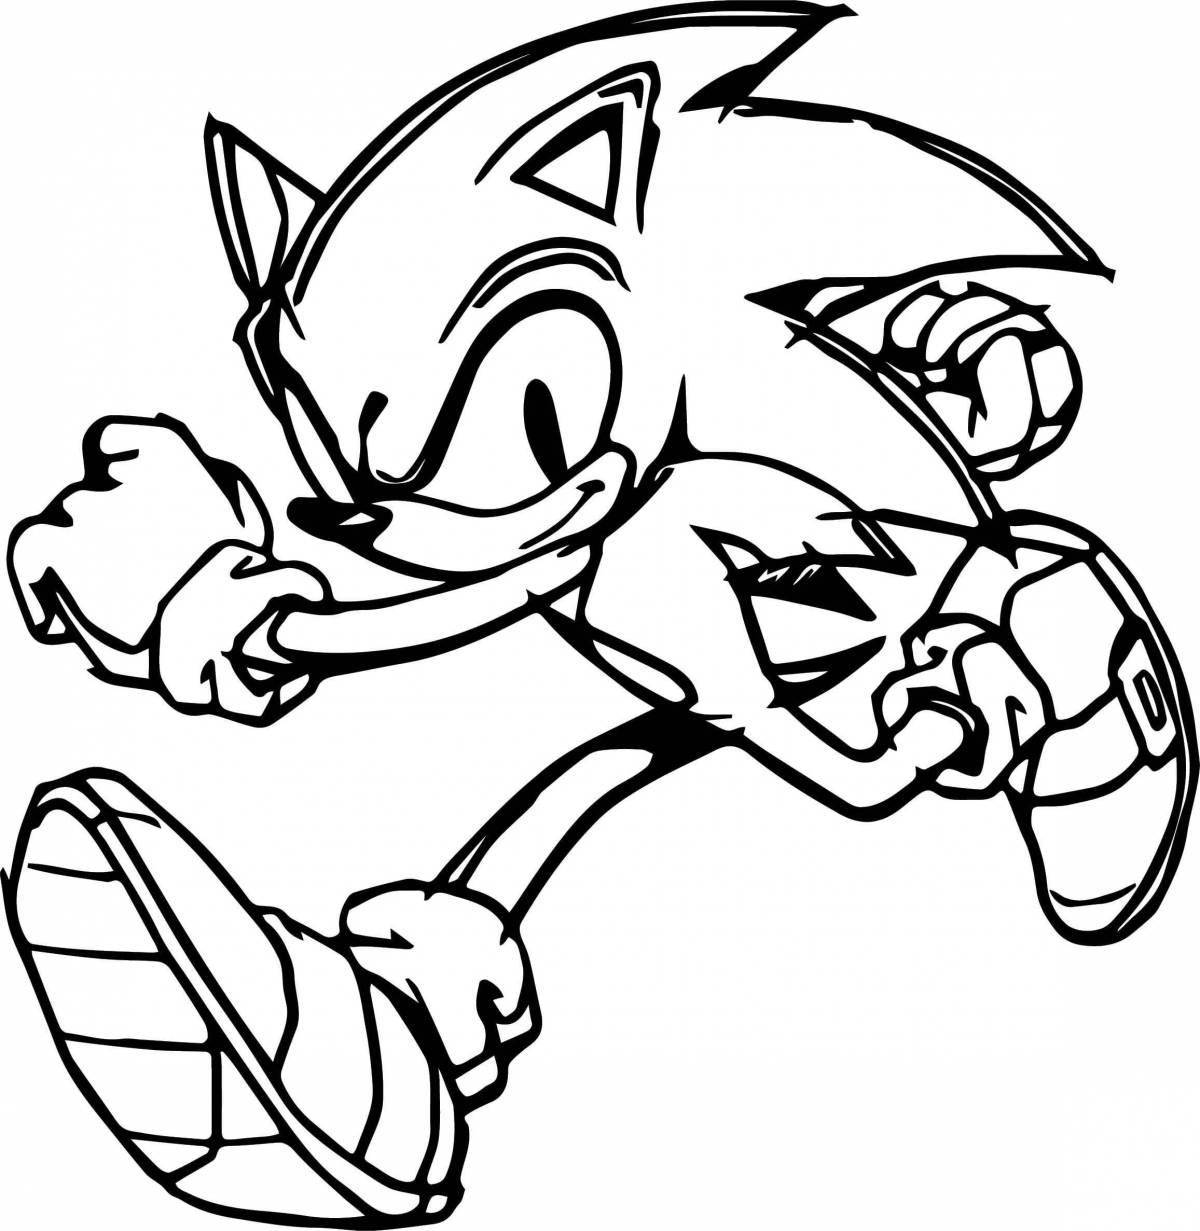 Serene blue sonic coloring page